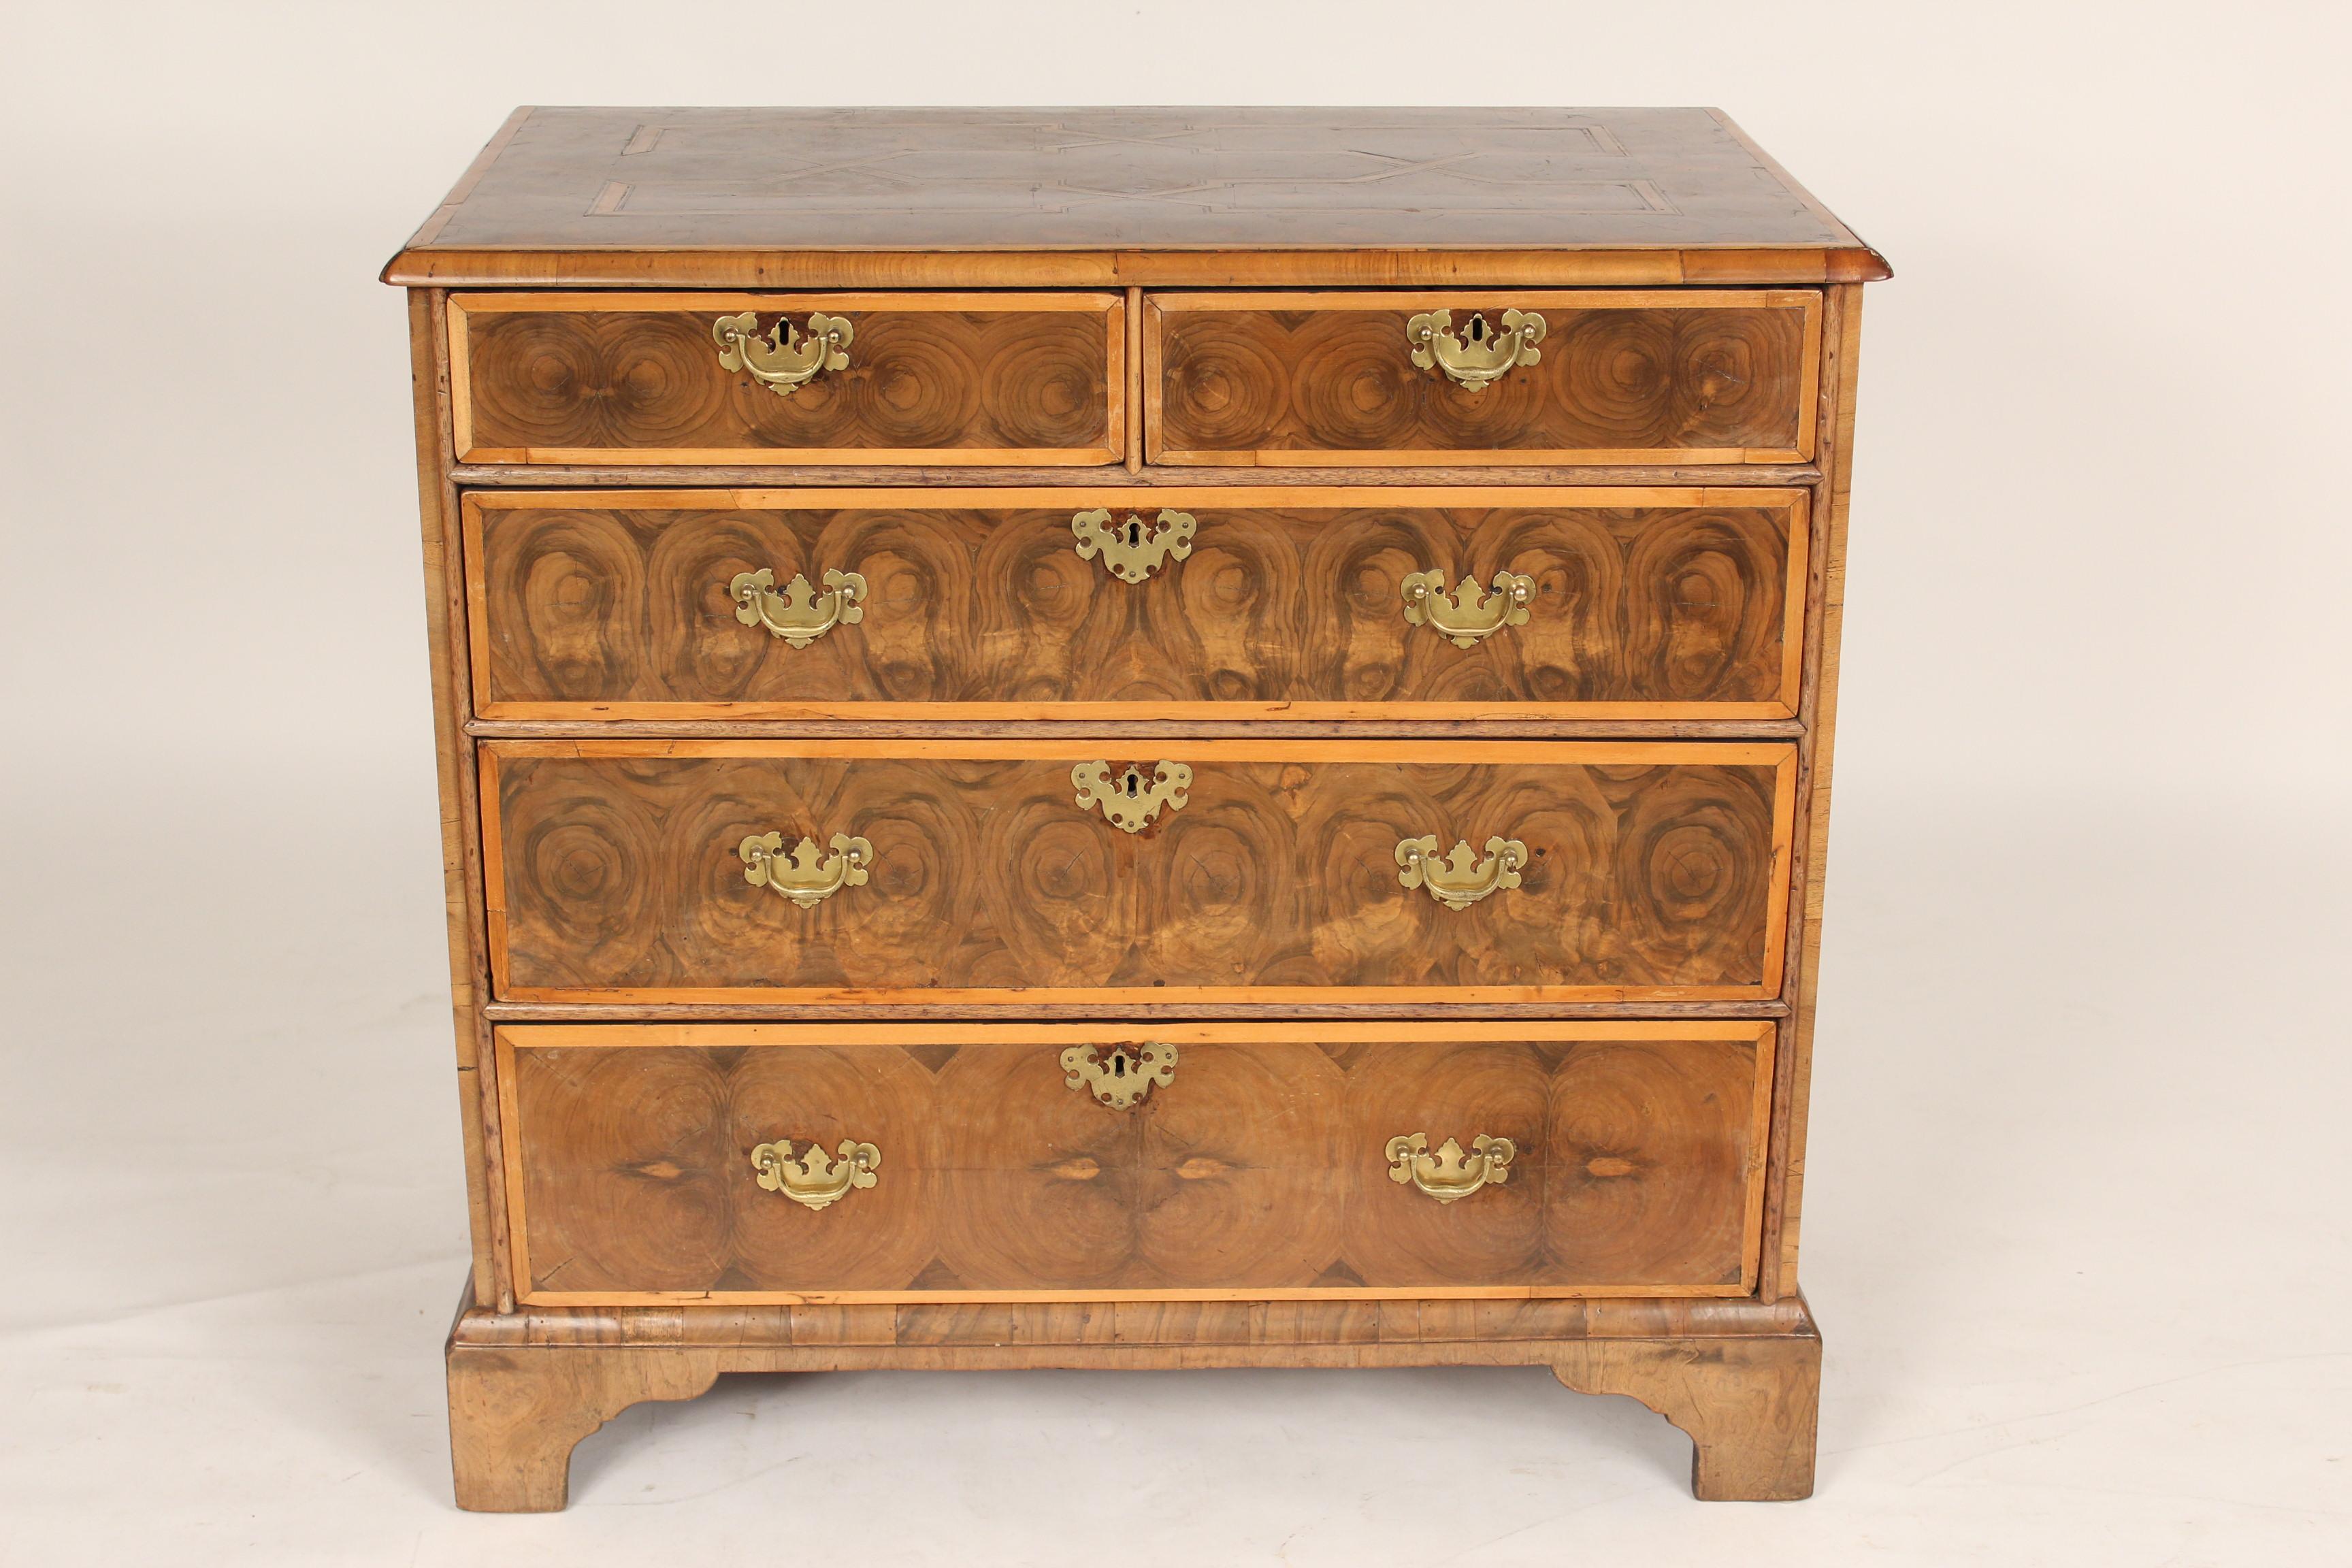 Georgian oyster burl chest of drawers, 18th century. Rare oyster burl (laburnum) used on top front and sides of chest, cross banded drawers, unusual inlay on top and sides, bottom and sides of chest dove tailed together.